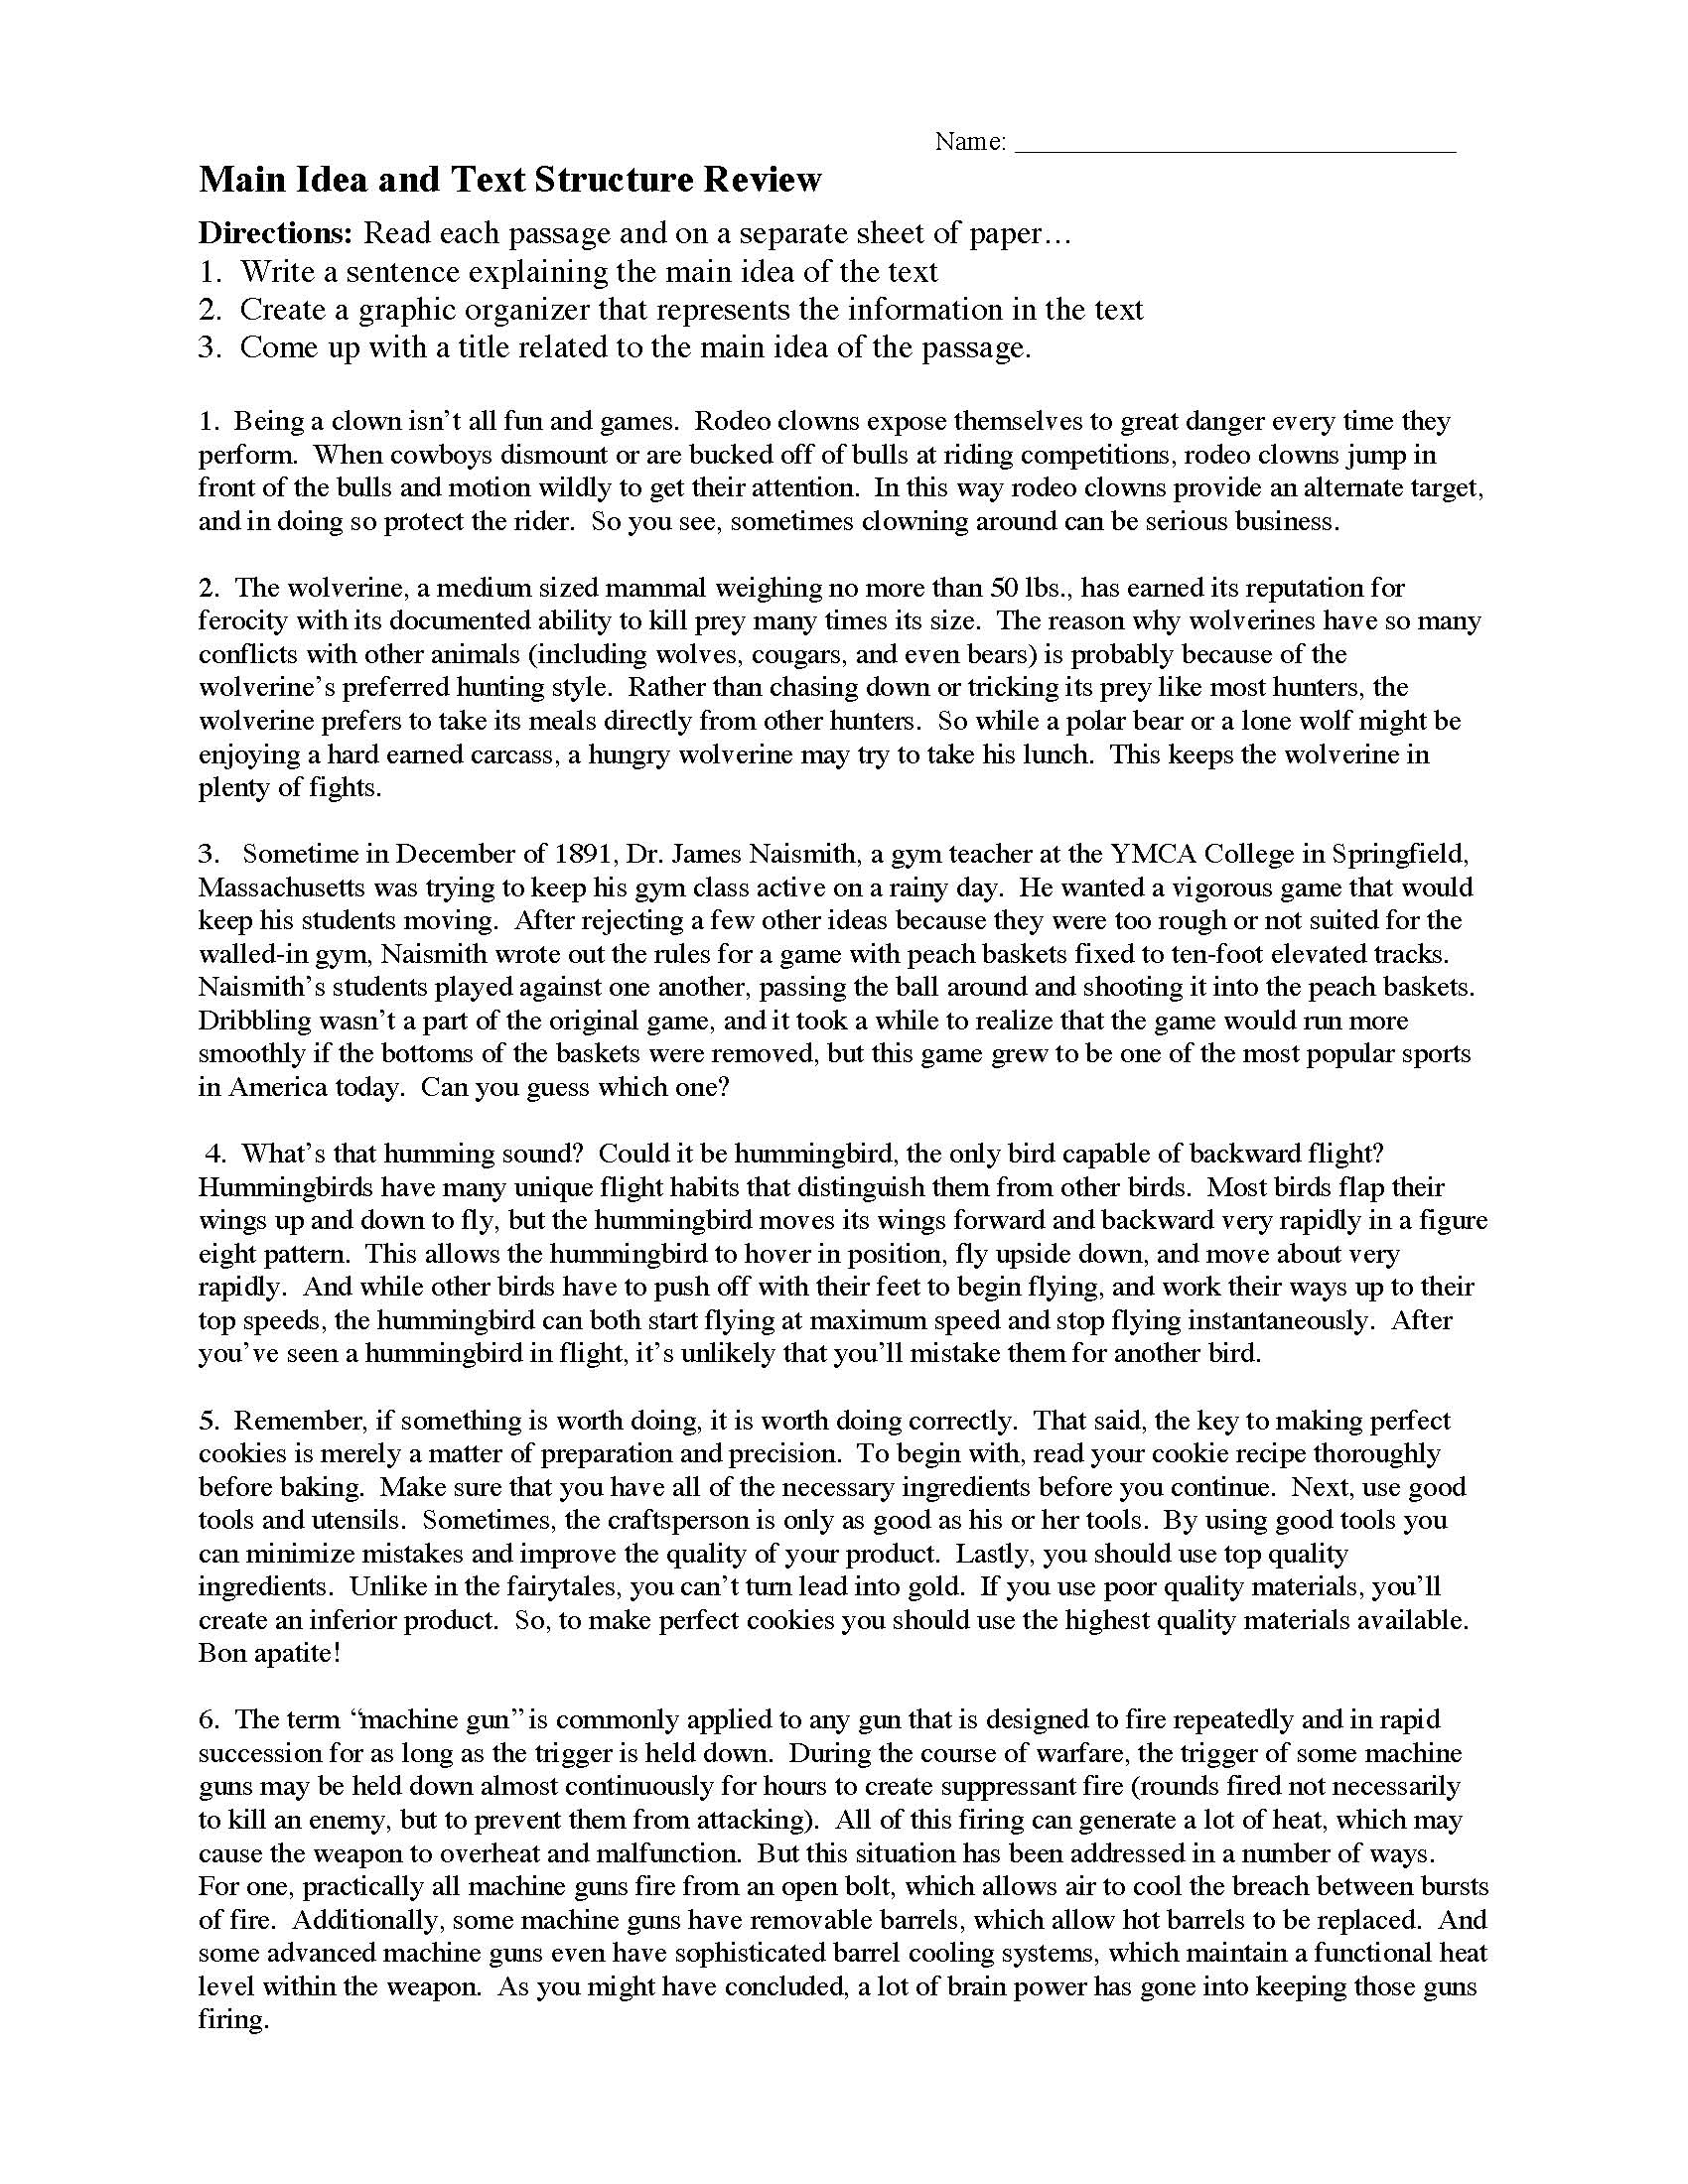 This is a preview image of Main Idea and Text Structure Worksheet 1. Click on it to enlarge it or view the source file.